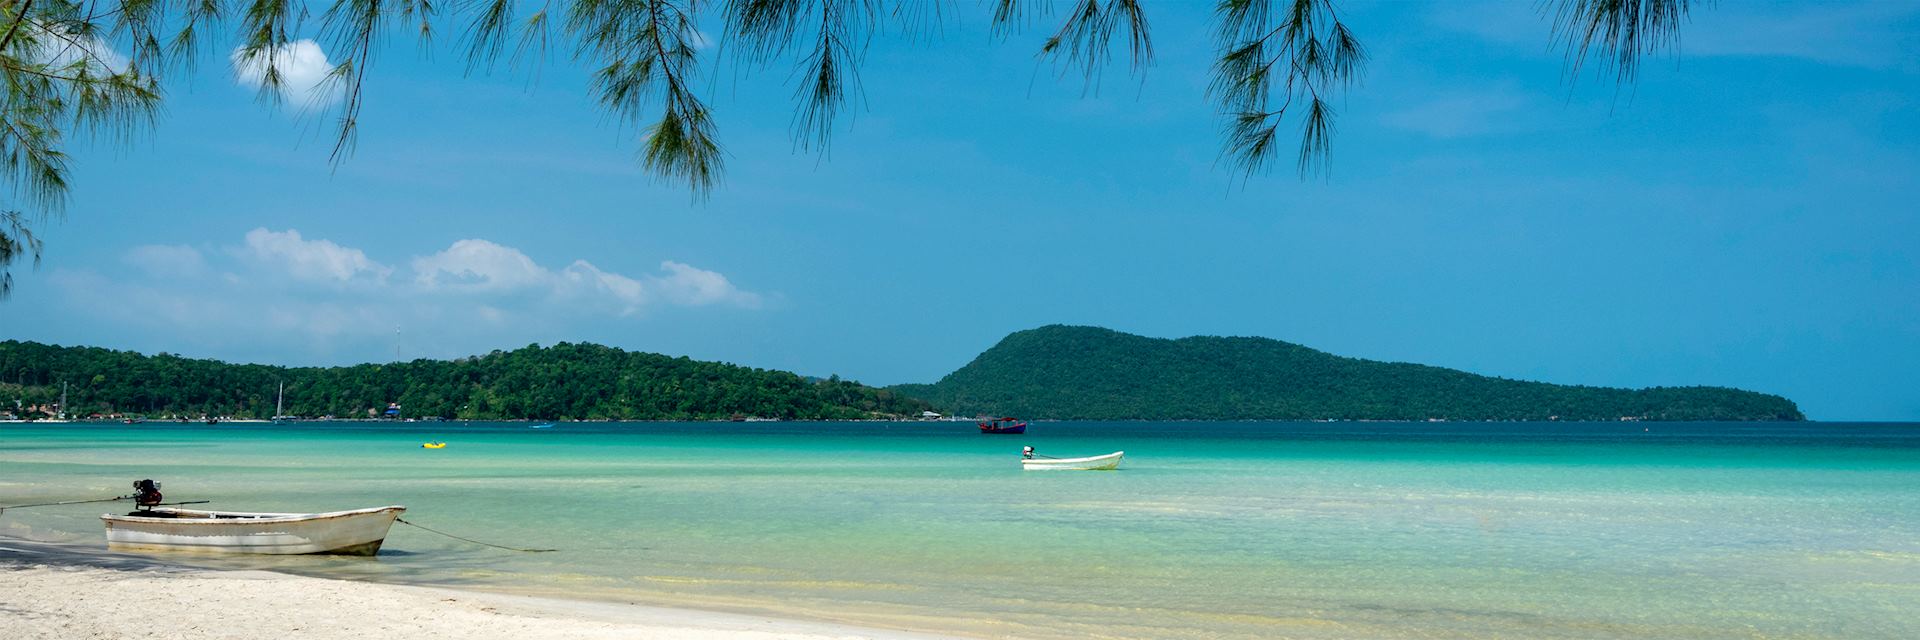 Beach in Koh Rong, Cambodia